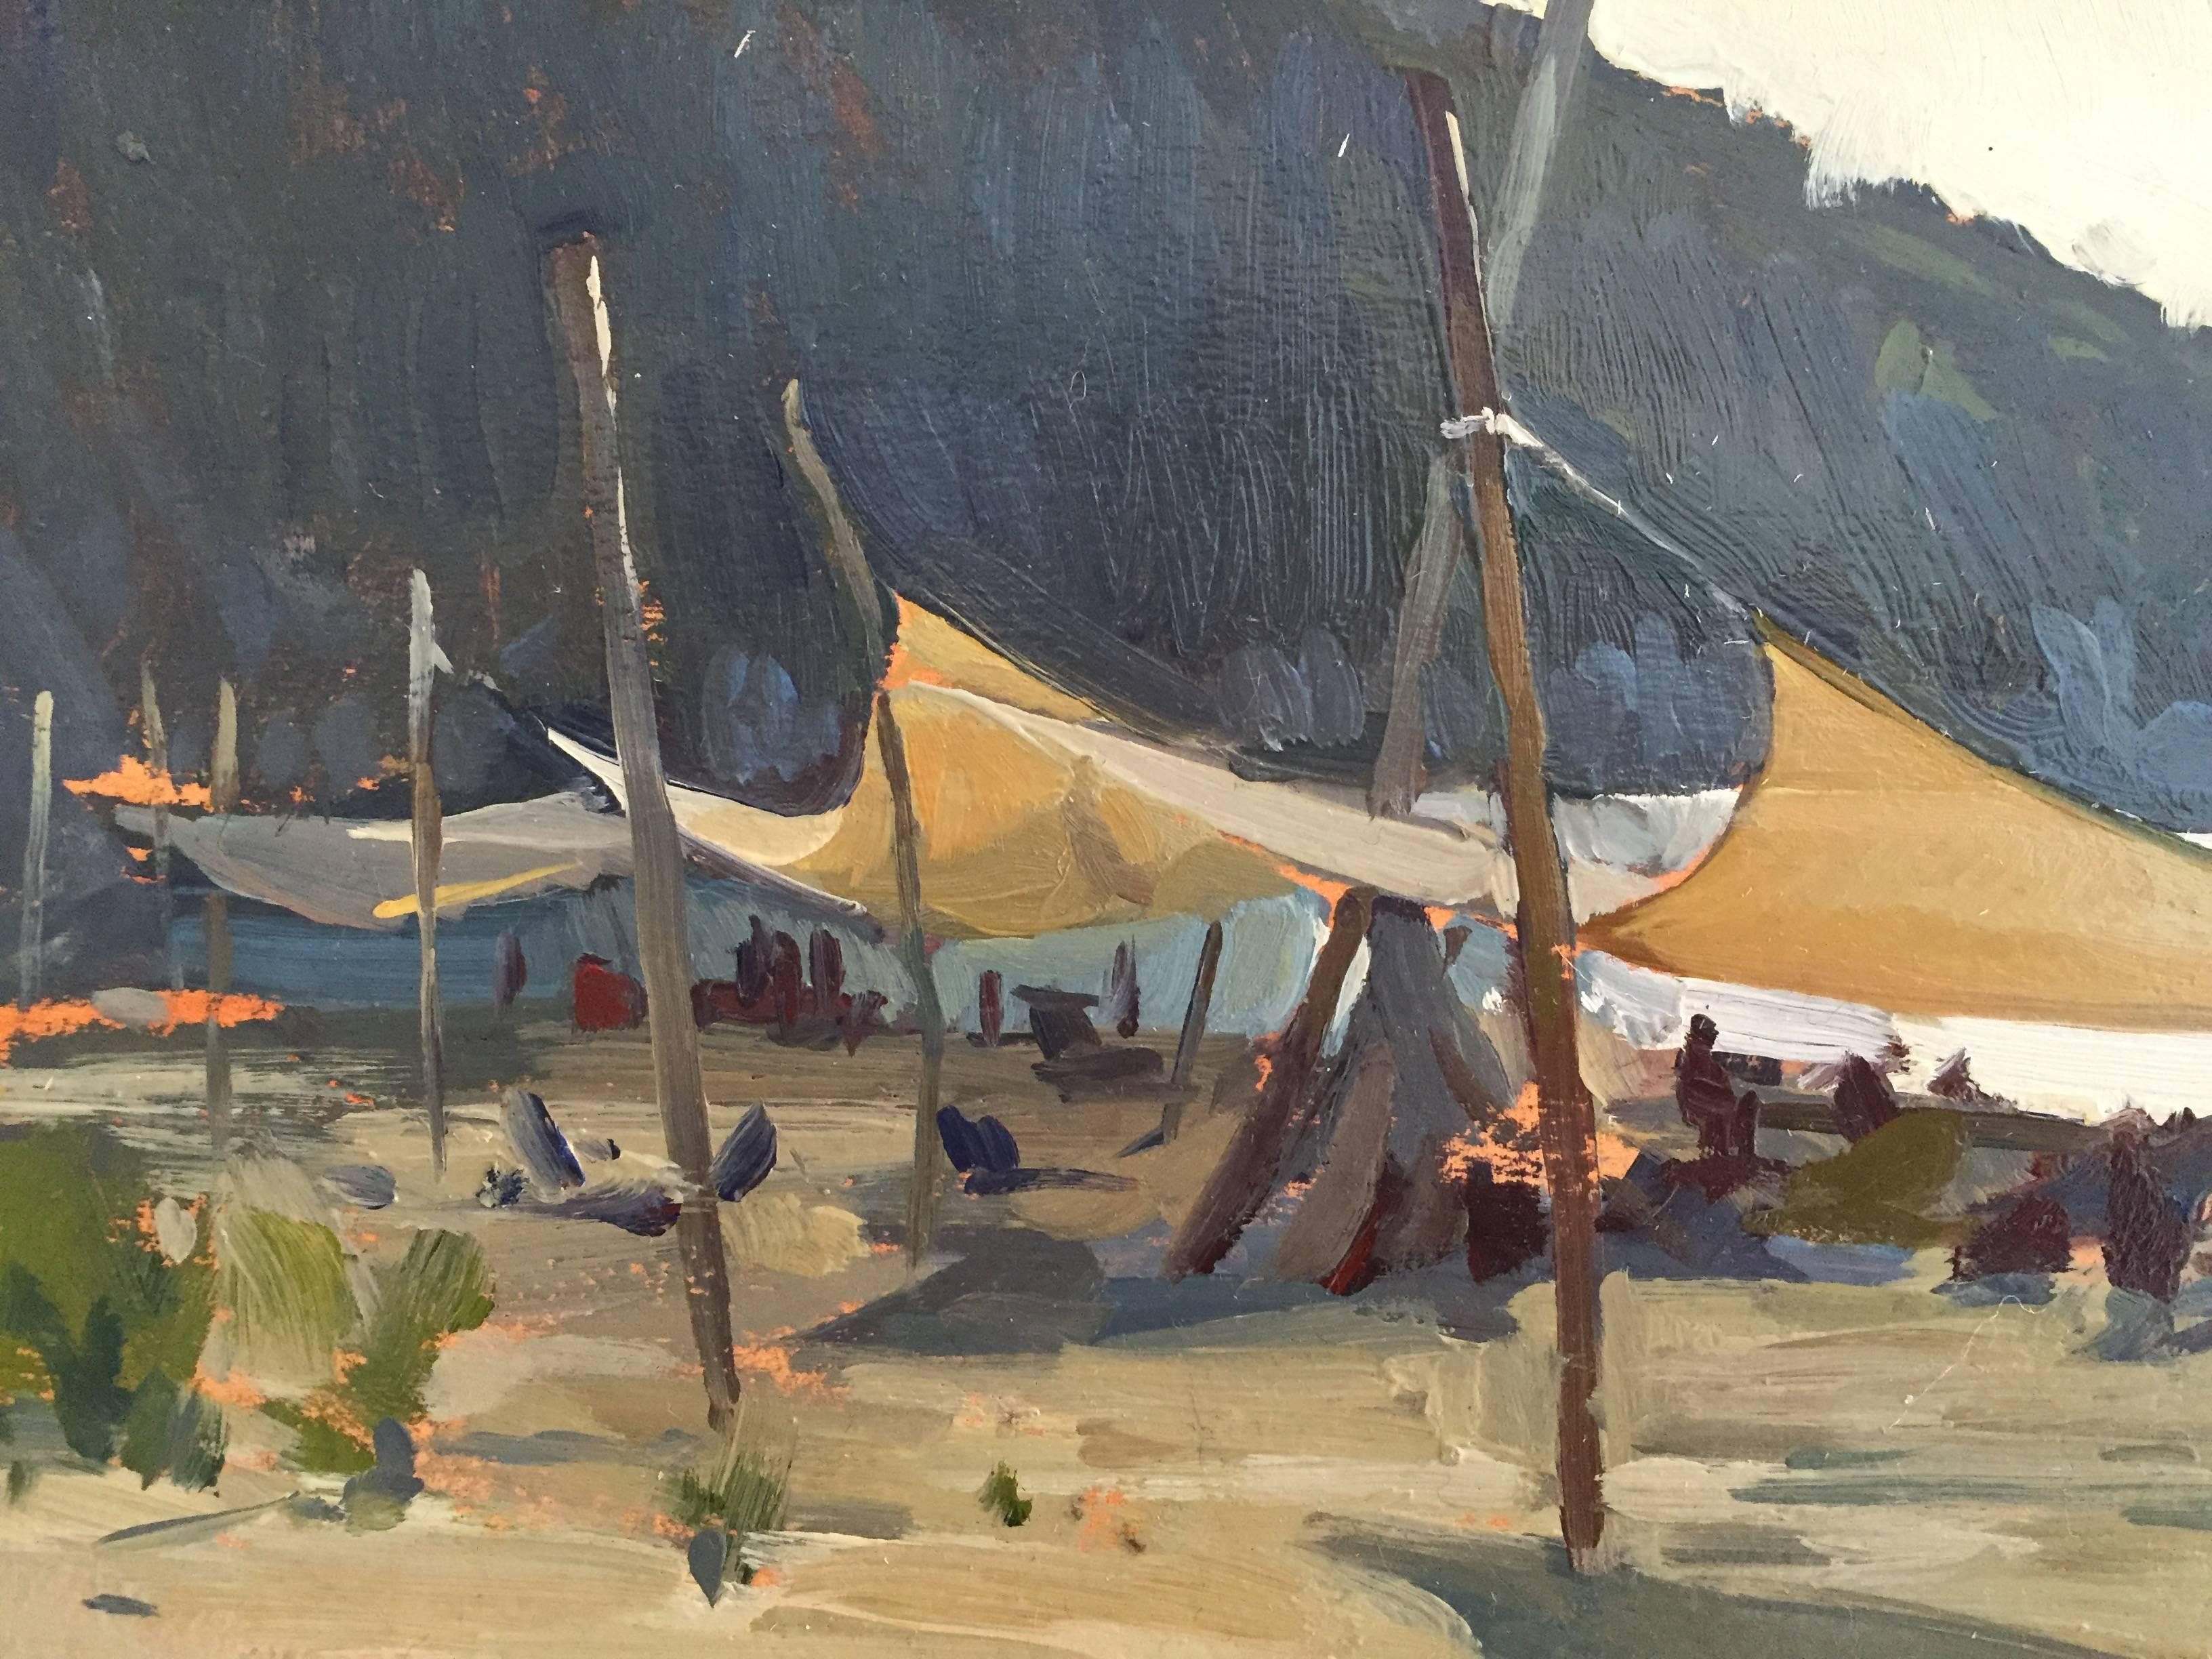 Painted en plein air on a beach in Italy. Sheets are strung up and stretched with driftwood, and create a shaded area for beach-goers to sit beneath. The rigid driftwood poles arranged on tilted angles make for a interesting composition. The sky is